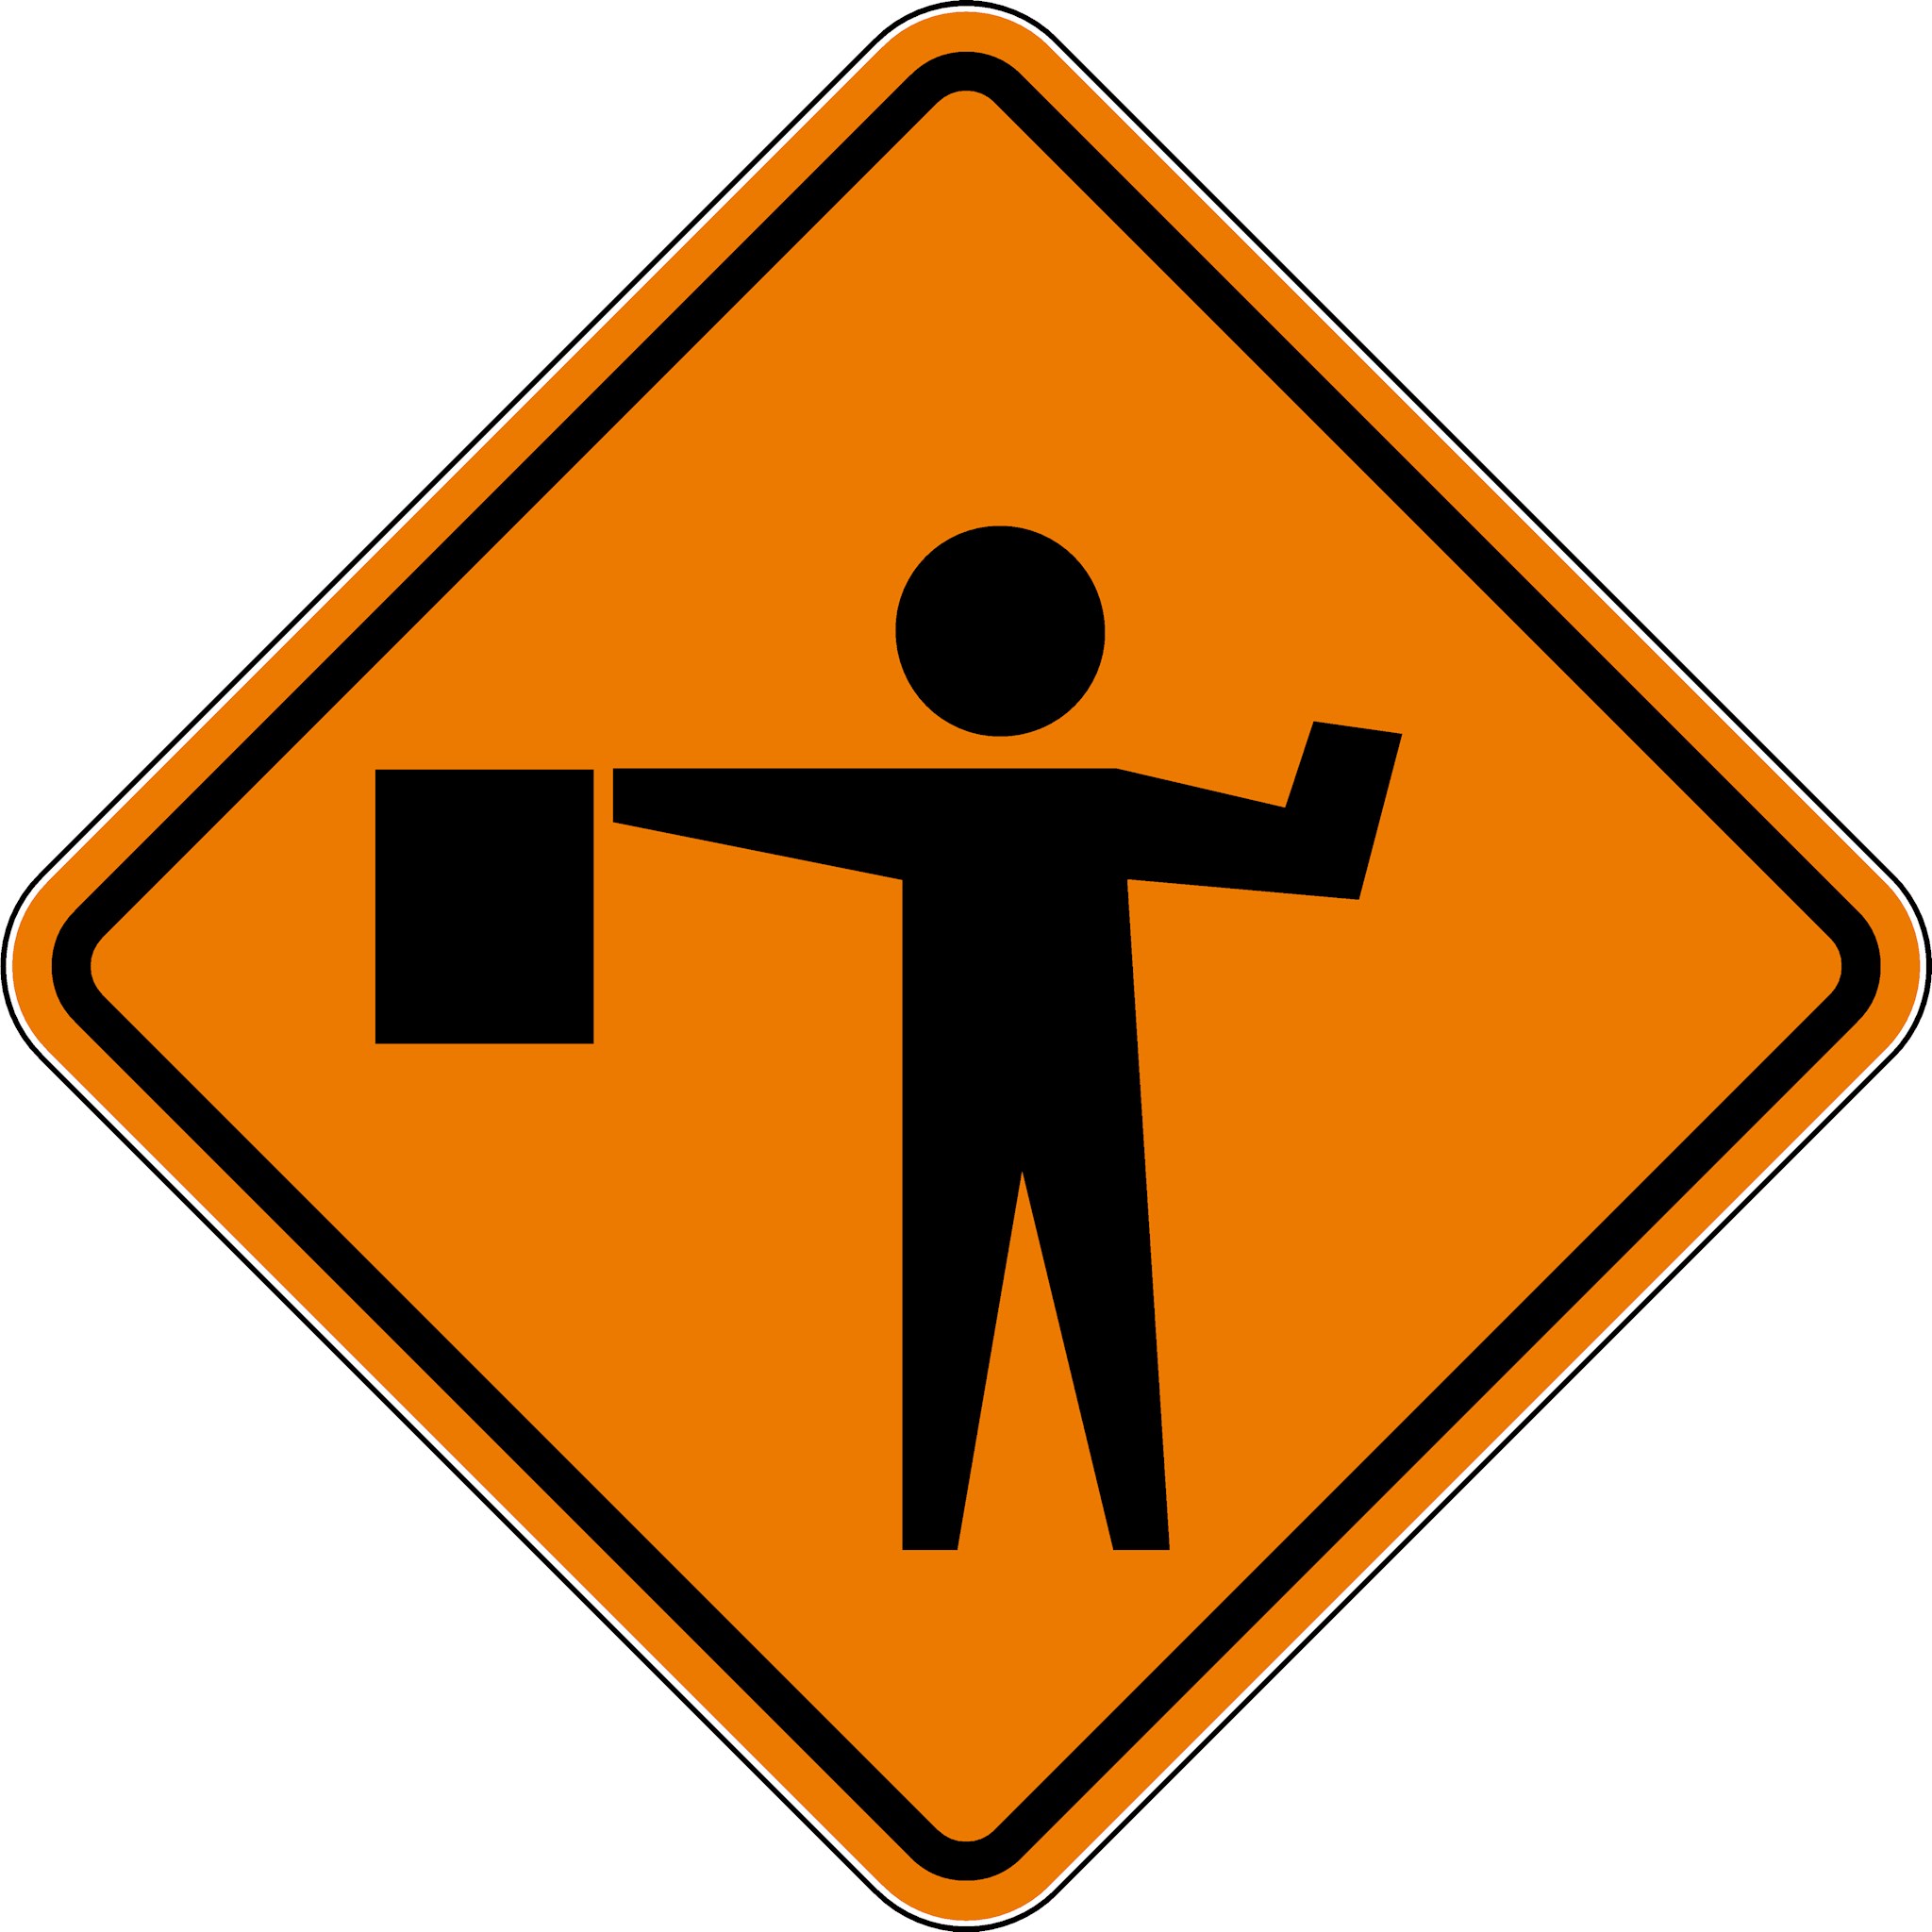 Traffic Signs & Safety - W20-7a 36